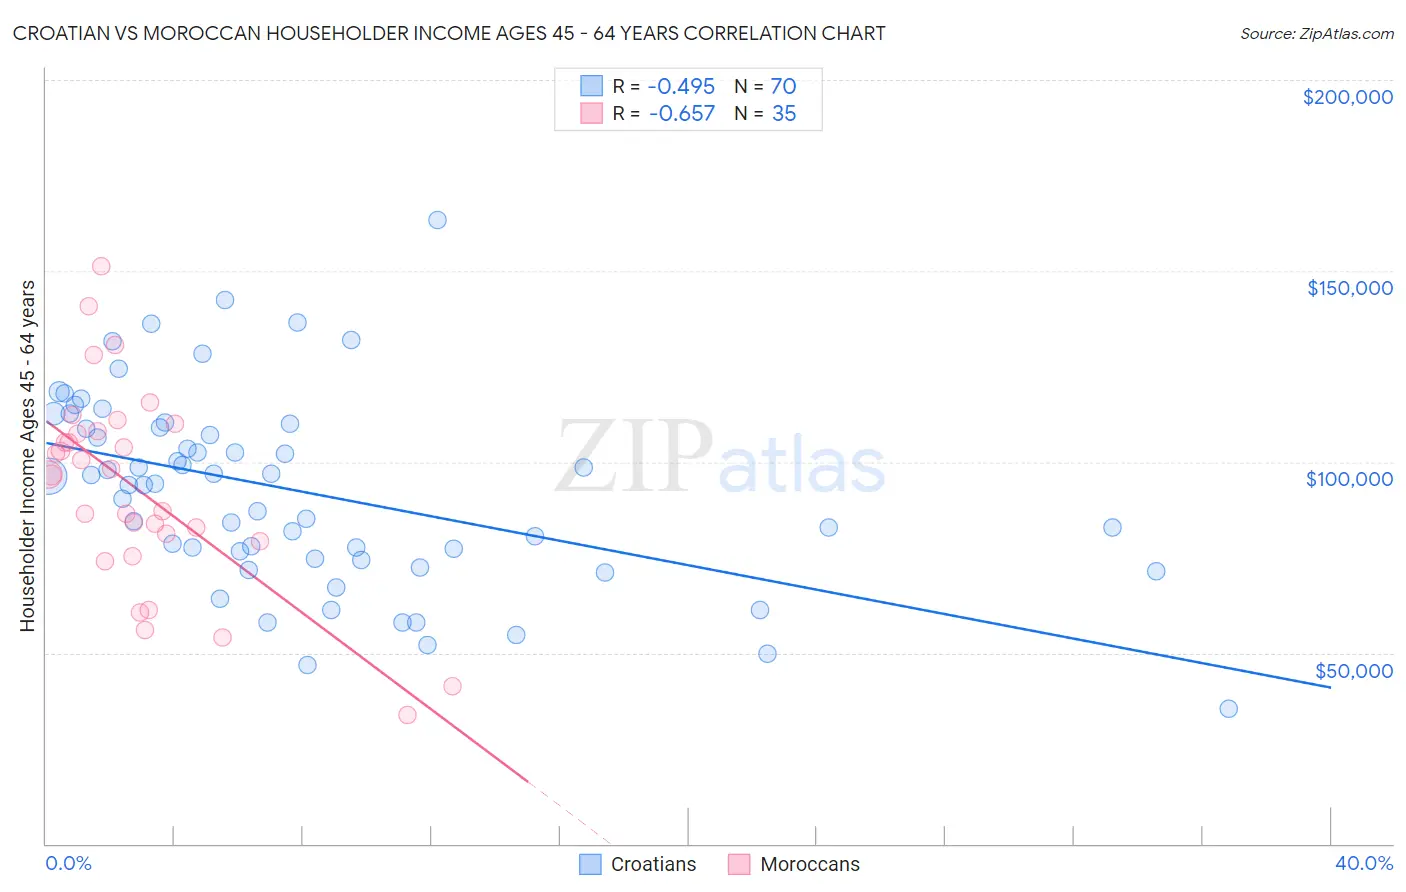 Croatian vs Moroccan Householder Income Ages 45 - 64 years